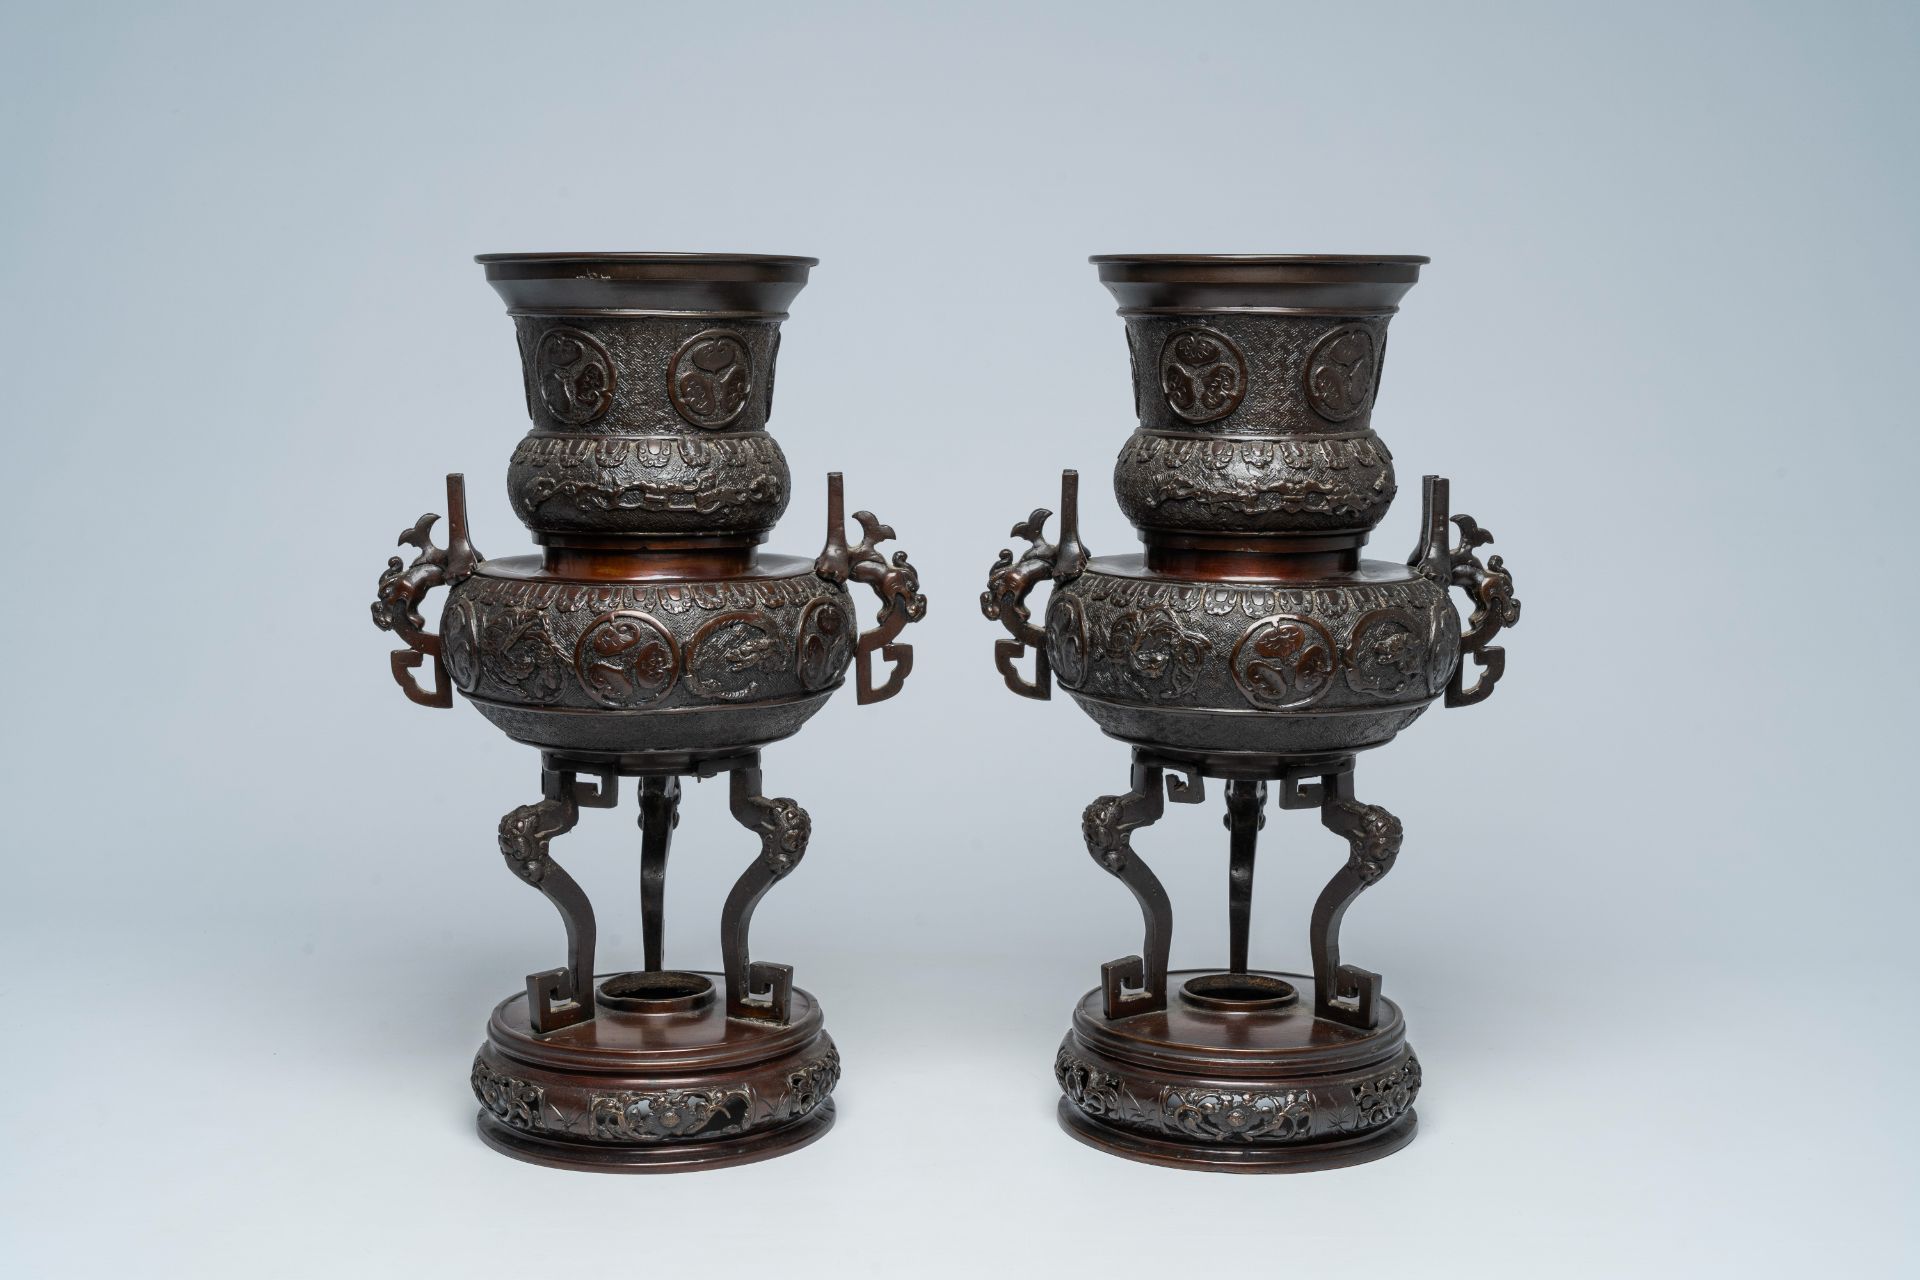 A pair of Japanese bronze vases with Tokugawa medallions in relief, Meiji, 19th C. - Image 4 of 7